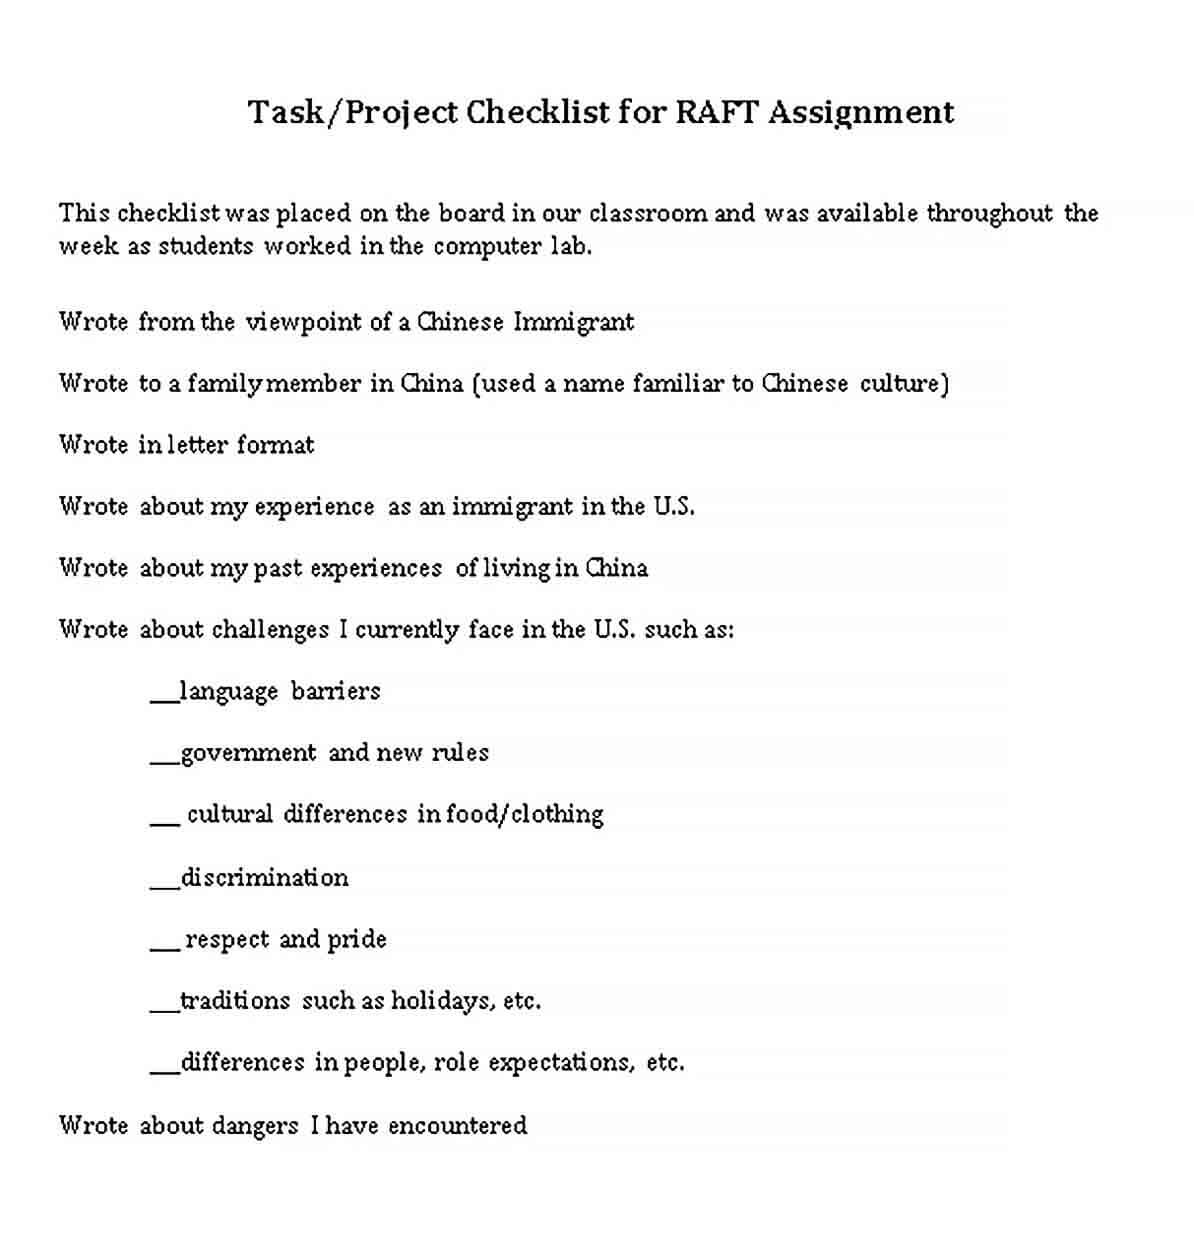 Assignment Checklist for Project